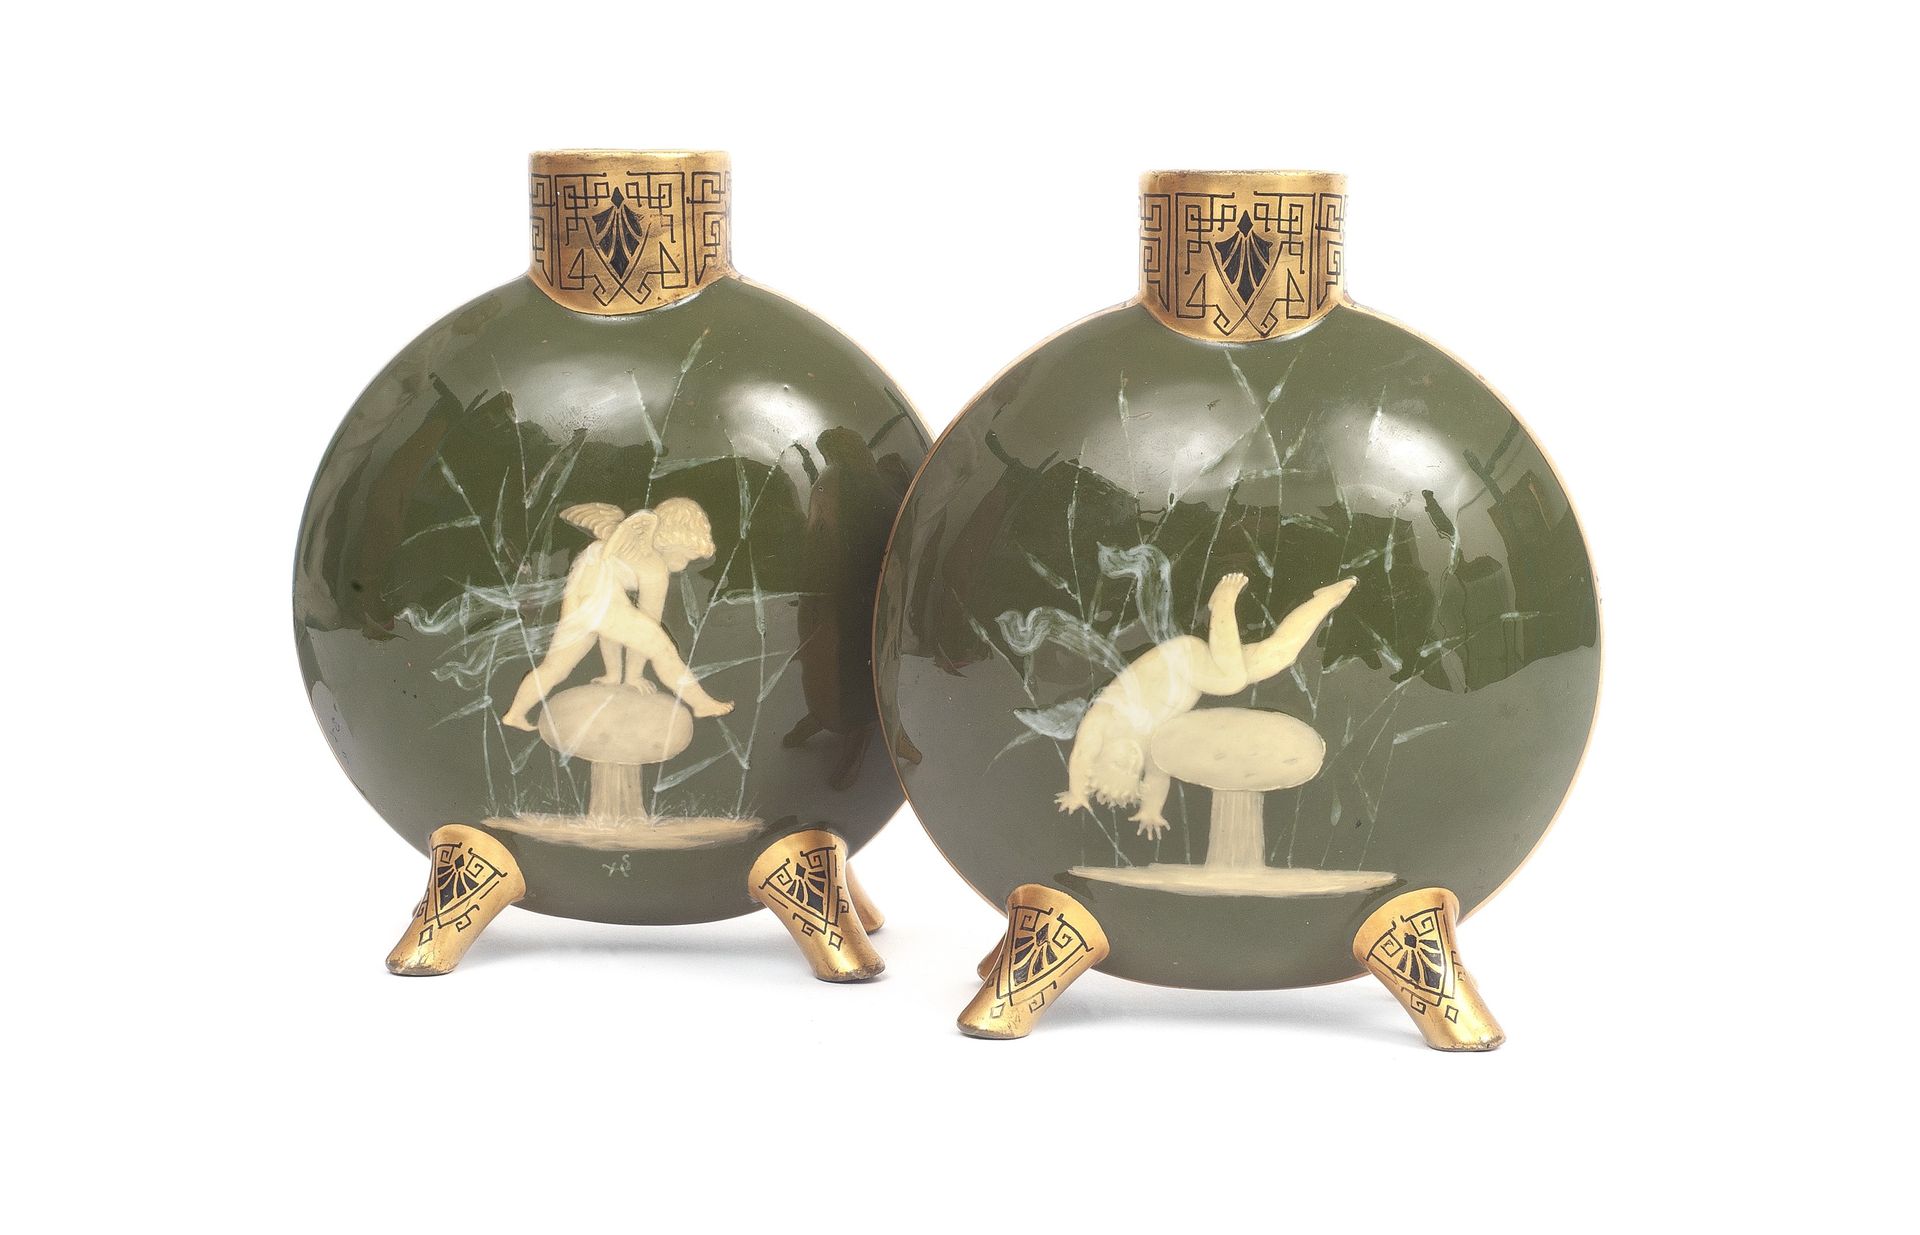 A PAIR OF PATE SUR PATE MOON VASES BY HENRY SAUNDERS FOR MOORE BROTHERS, CIRCA 1&hellip;